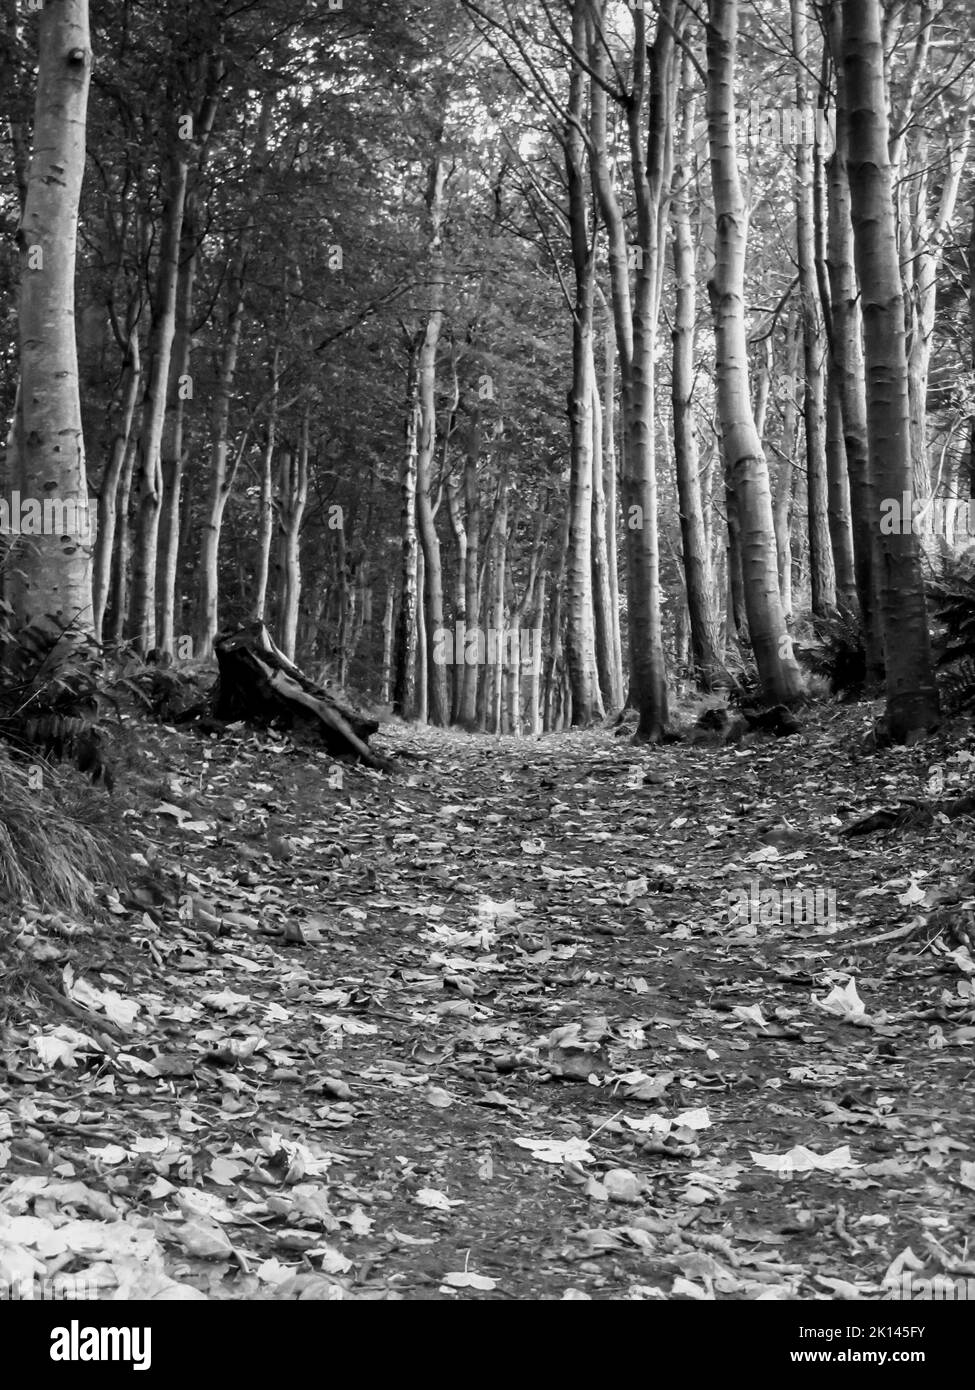 A Forest trail covered in fallen leaves, in black and white in the North-eastern Scottish countryside. Stock Photo